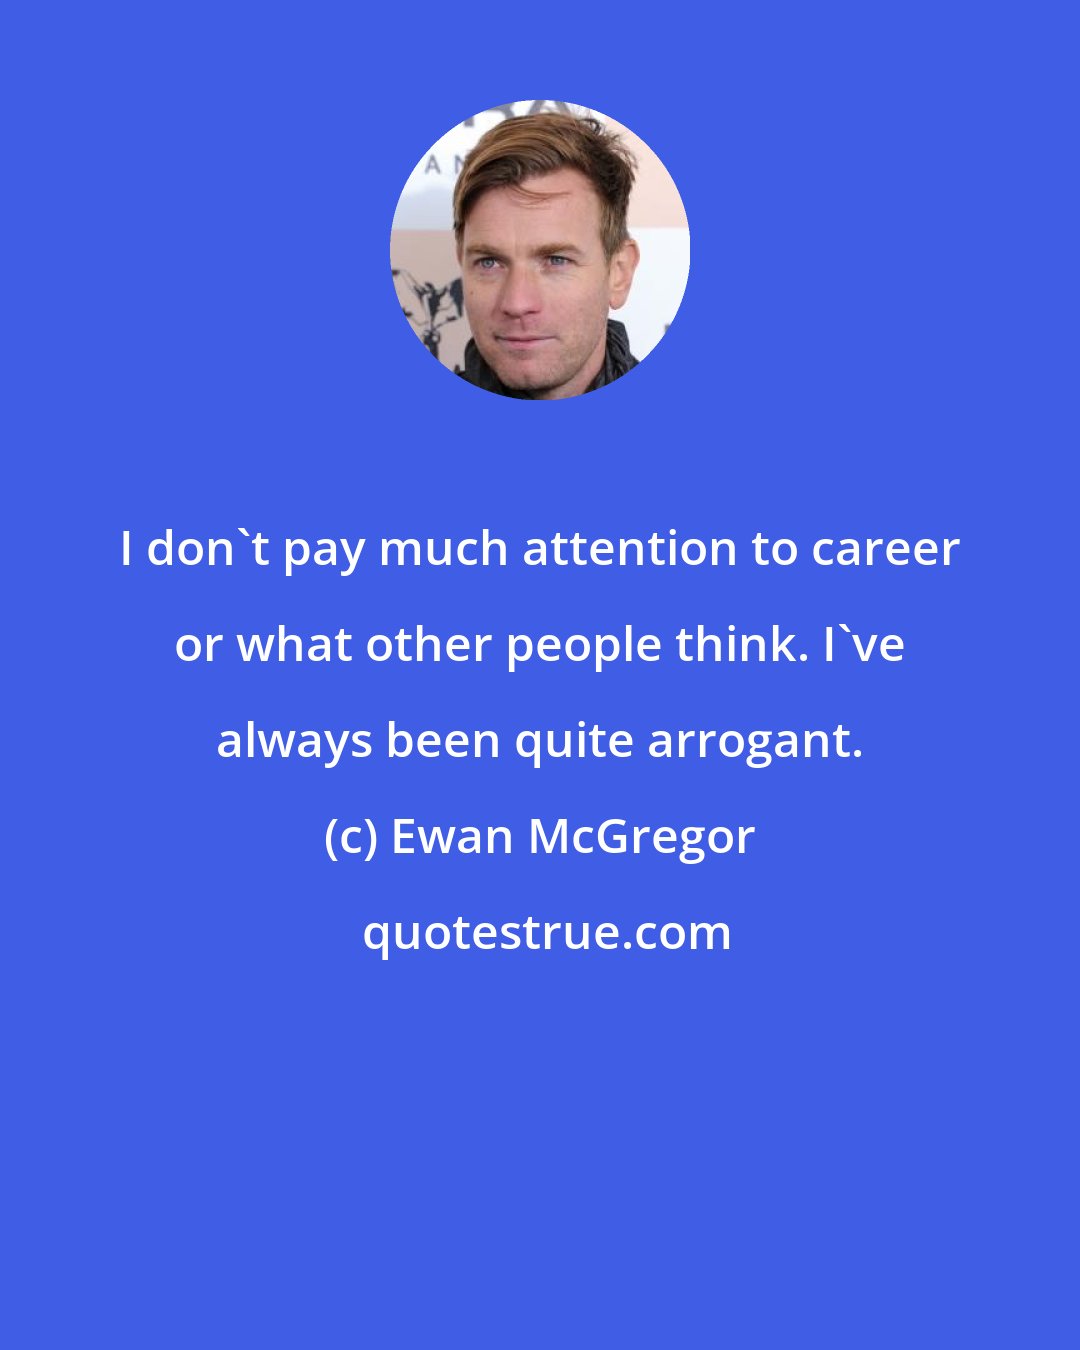 Ewan McGregor: I don't pay much attention to career or what other people think. I've always been quite arrogant.